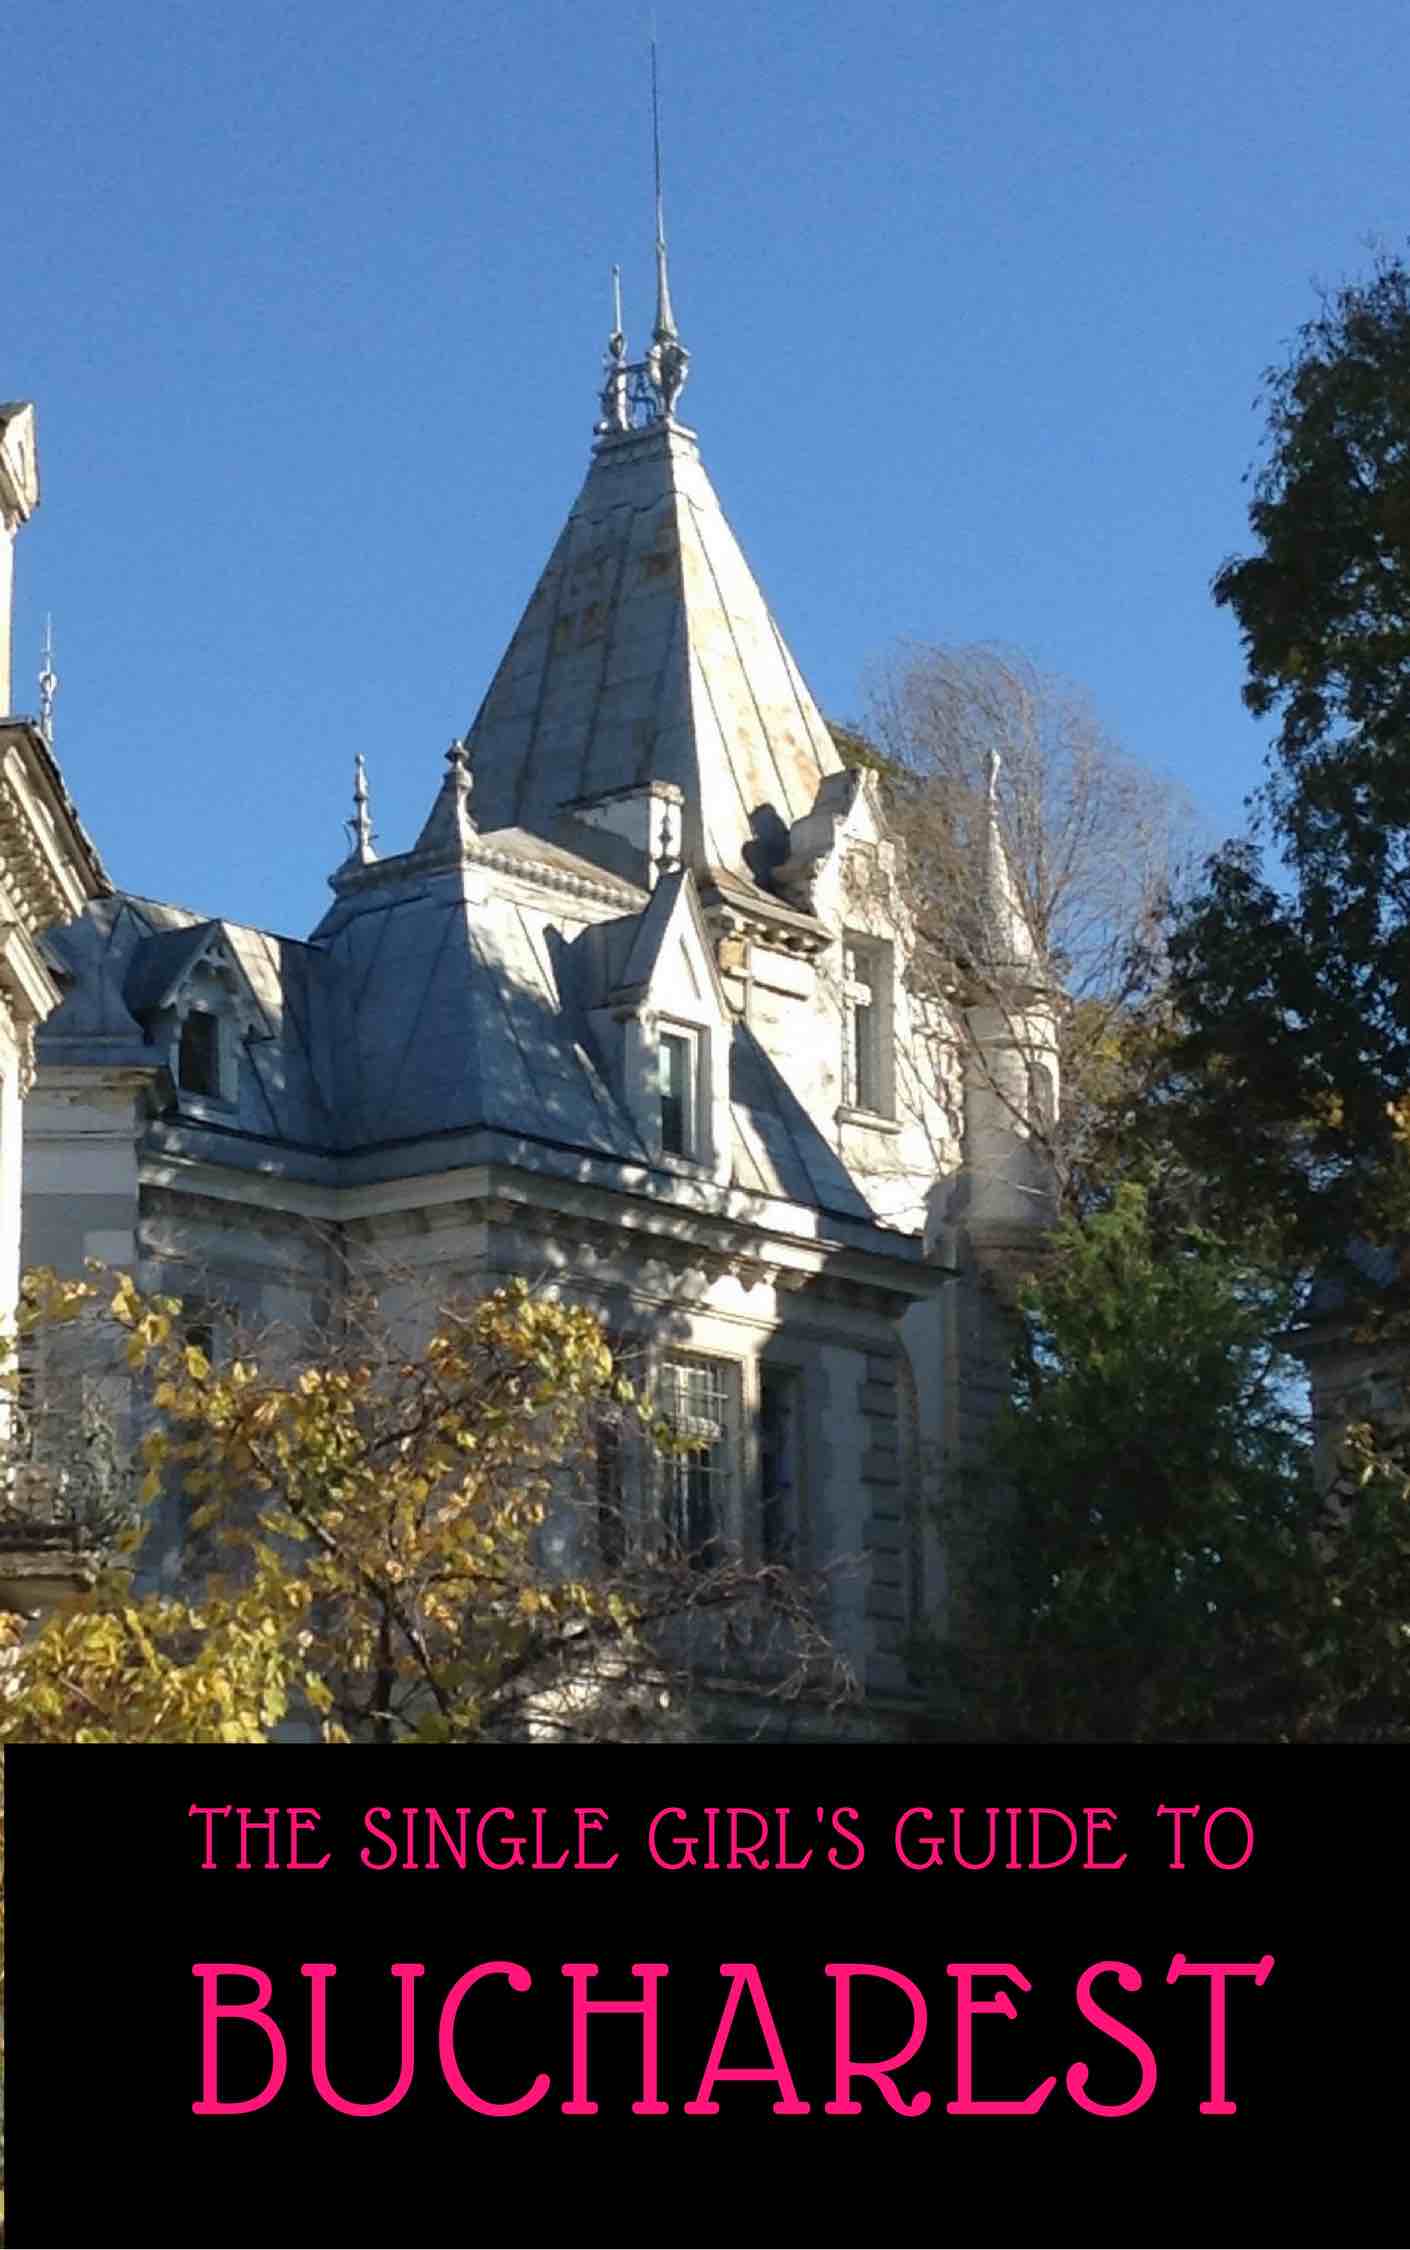 FREE: The Single Girl’s Guide to Bucharest by Emily Blanchland